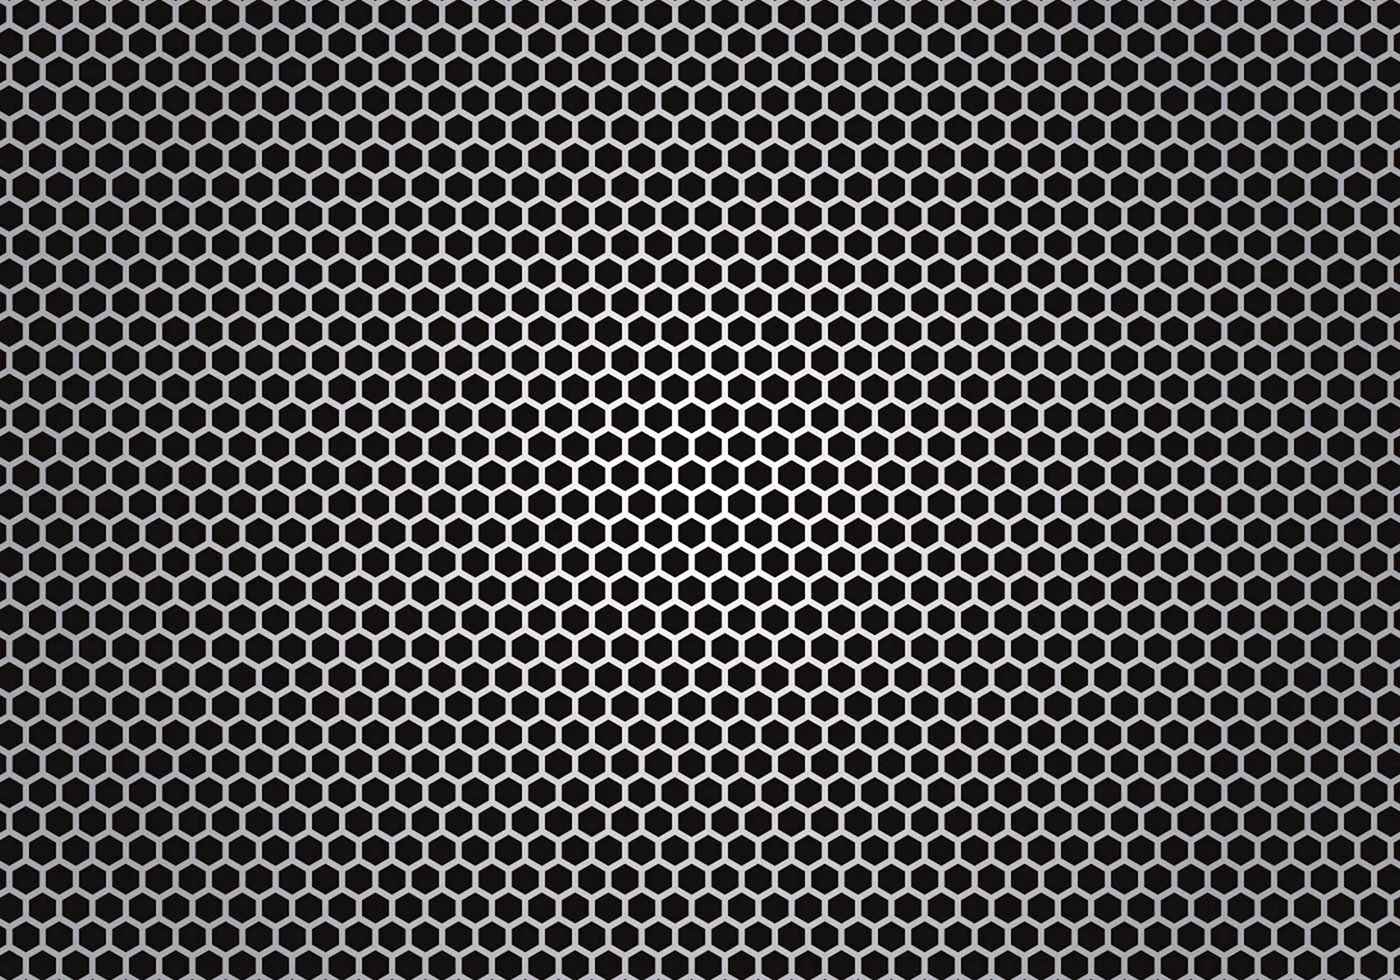 Grille hexagonal Cell texture stock vector free